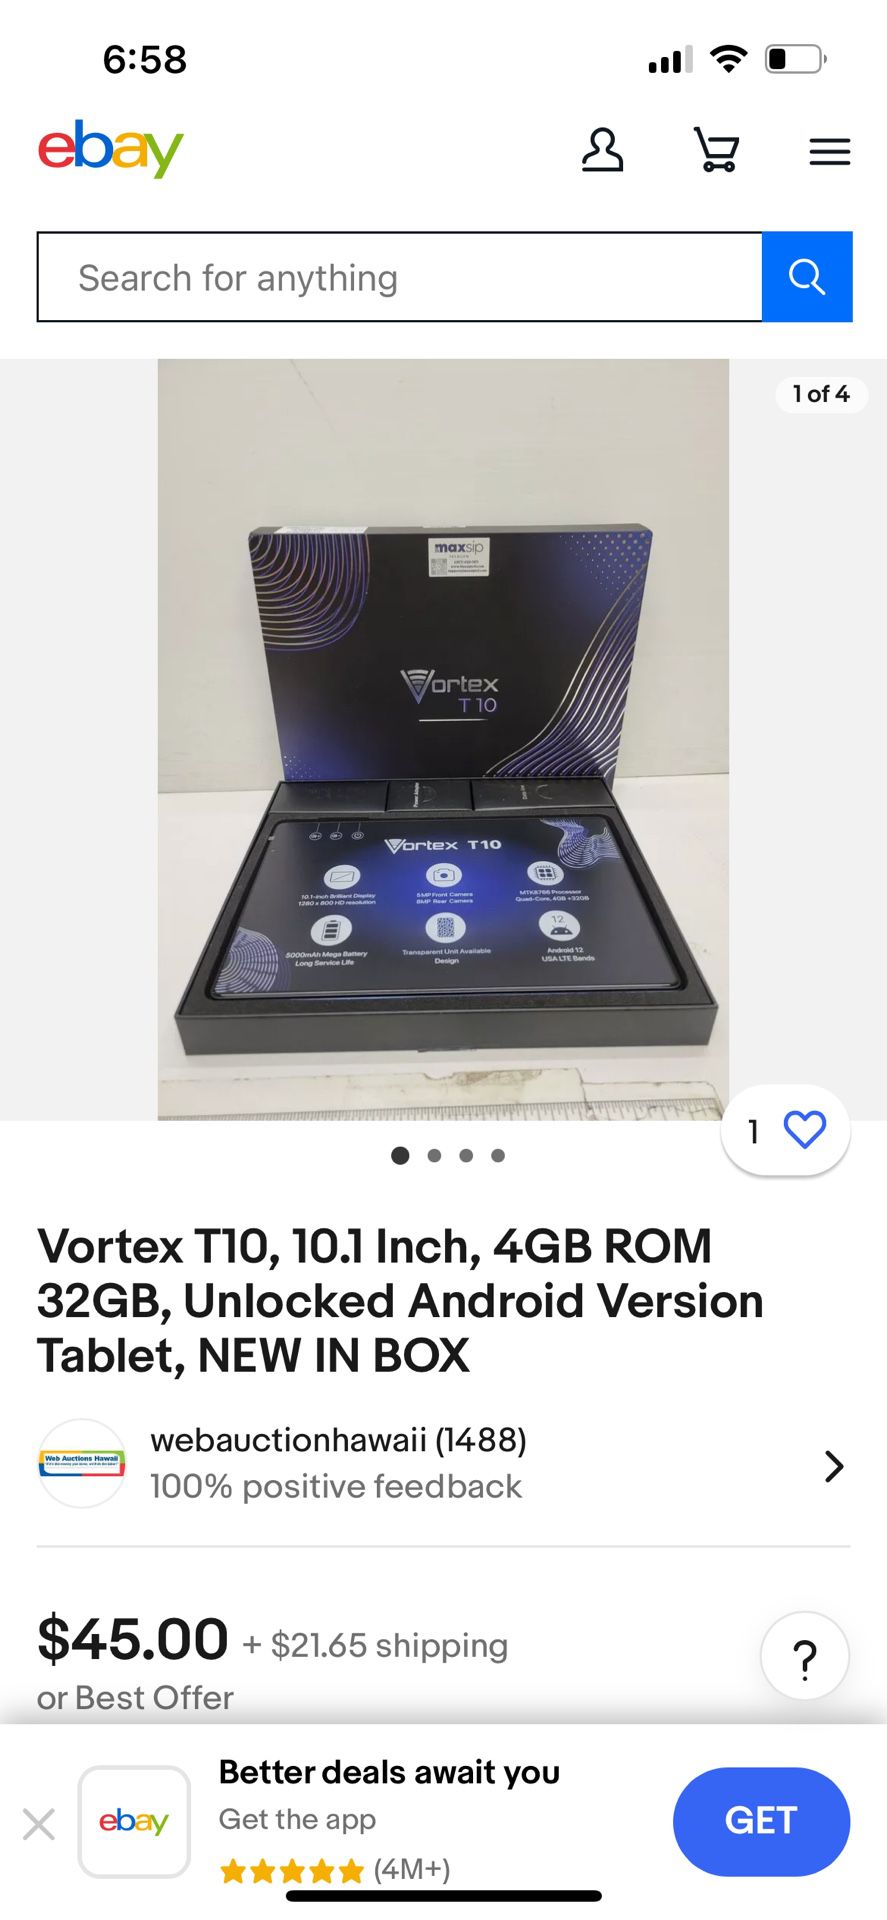 Tablet Vortex T10, 10.1 Inch, 4GB ROM 32GB, Android Version Tablet, NEW IN BOX